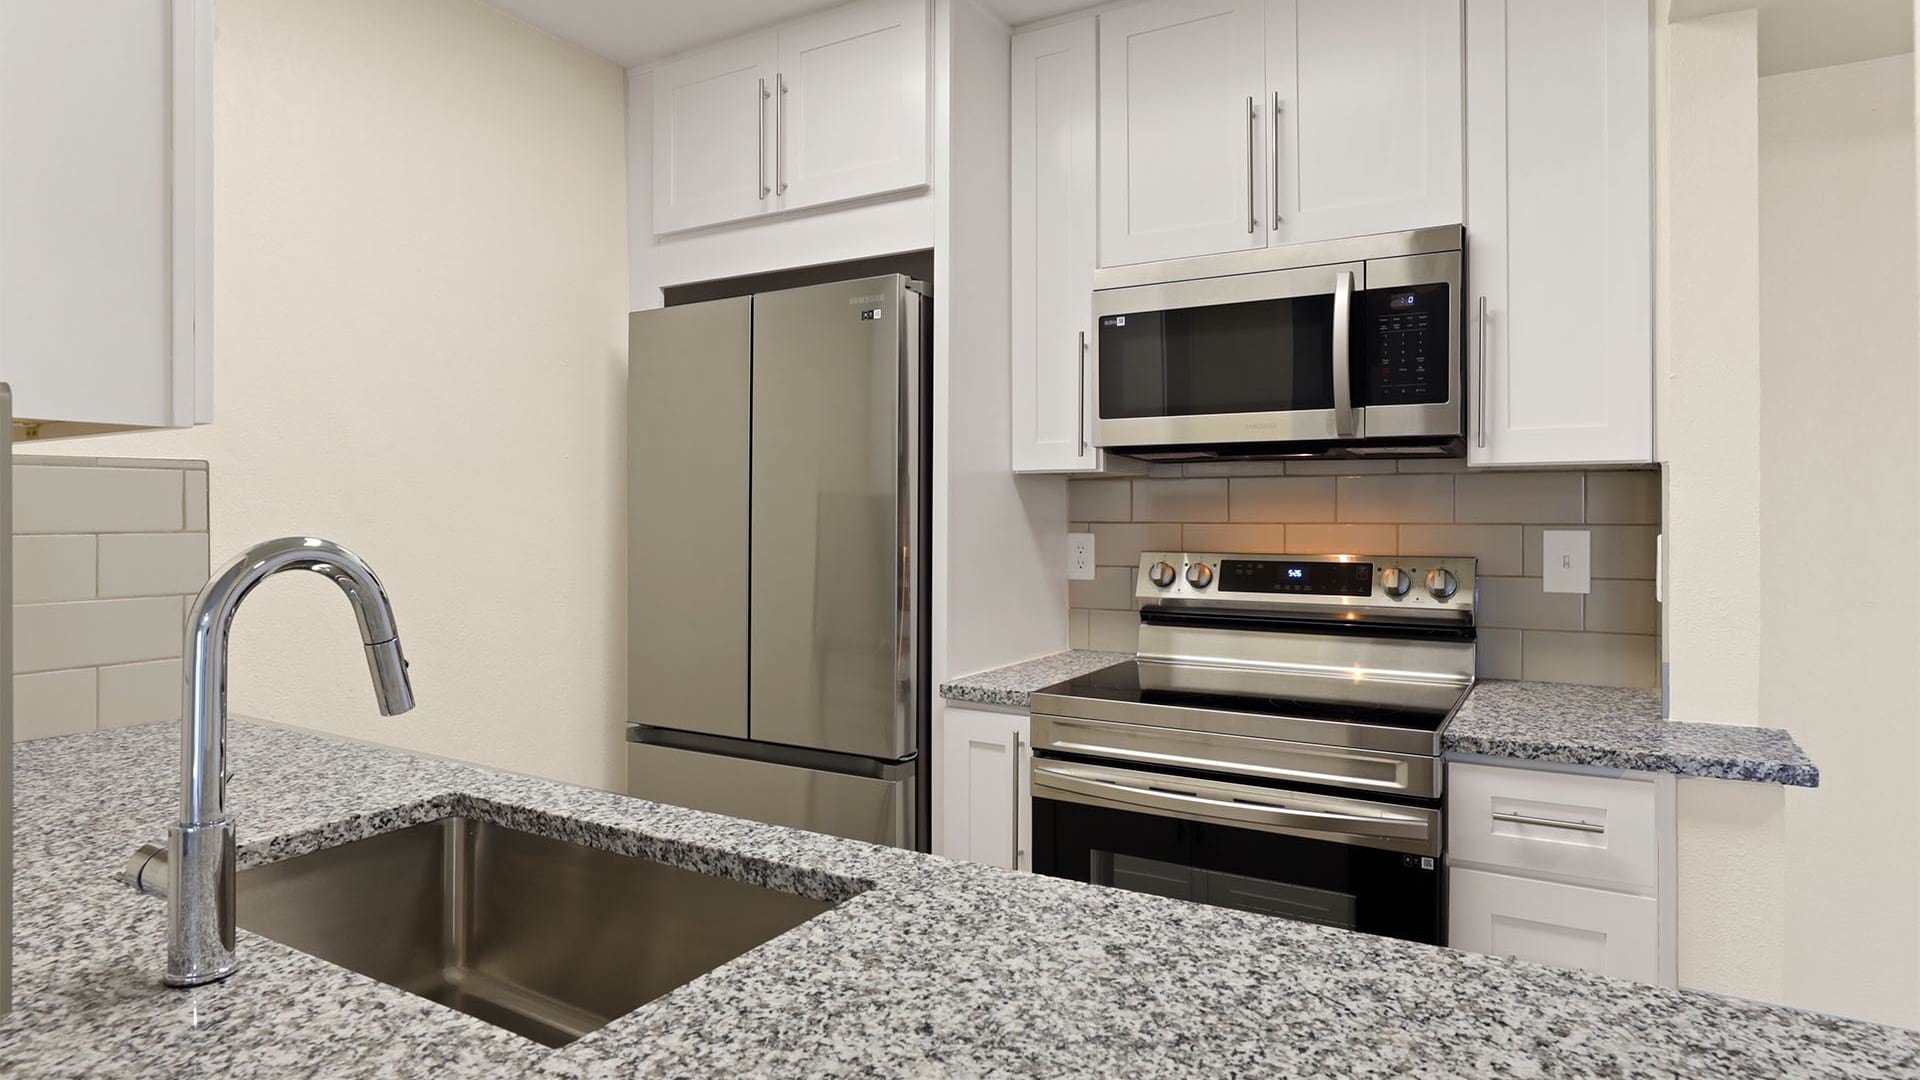 Kitchen with White Cabinetry and Energy-Efficient Stainless Steel Appliances at Our Catalina Foothills, AZ Apartments